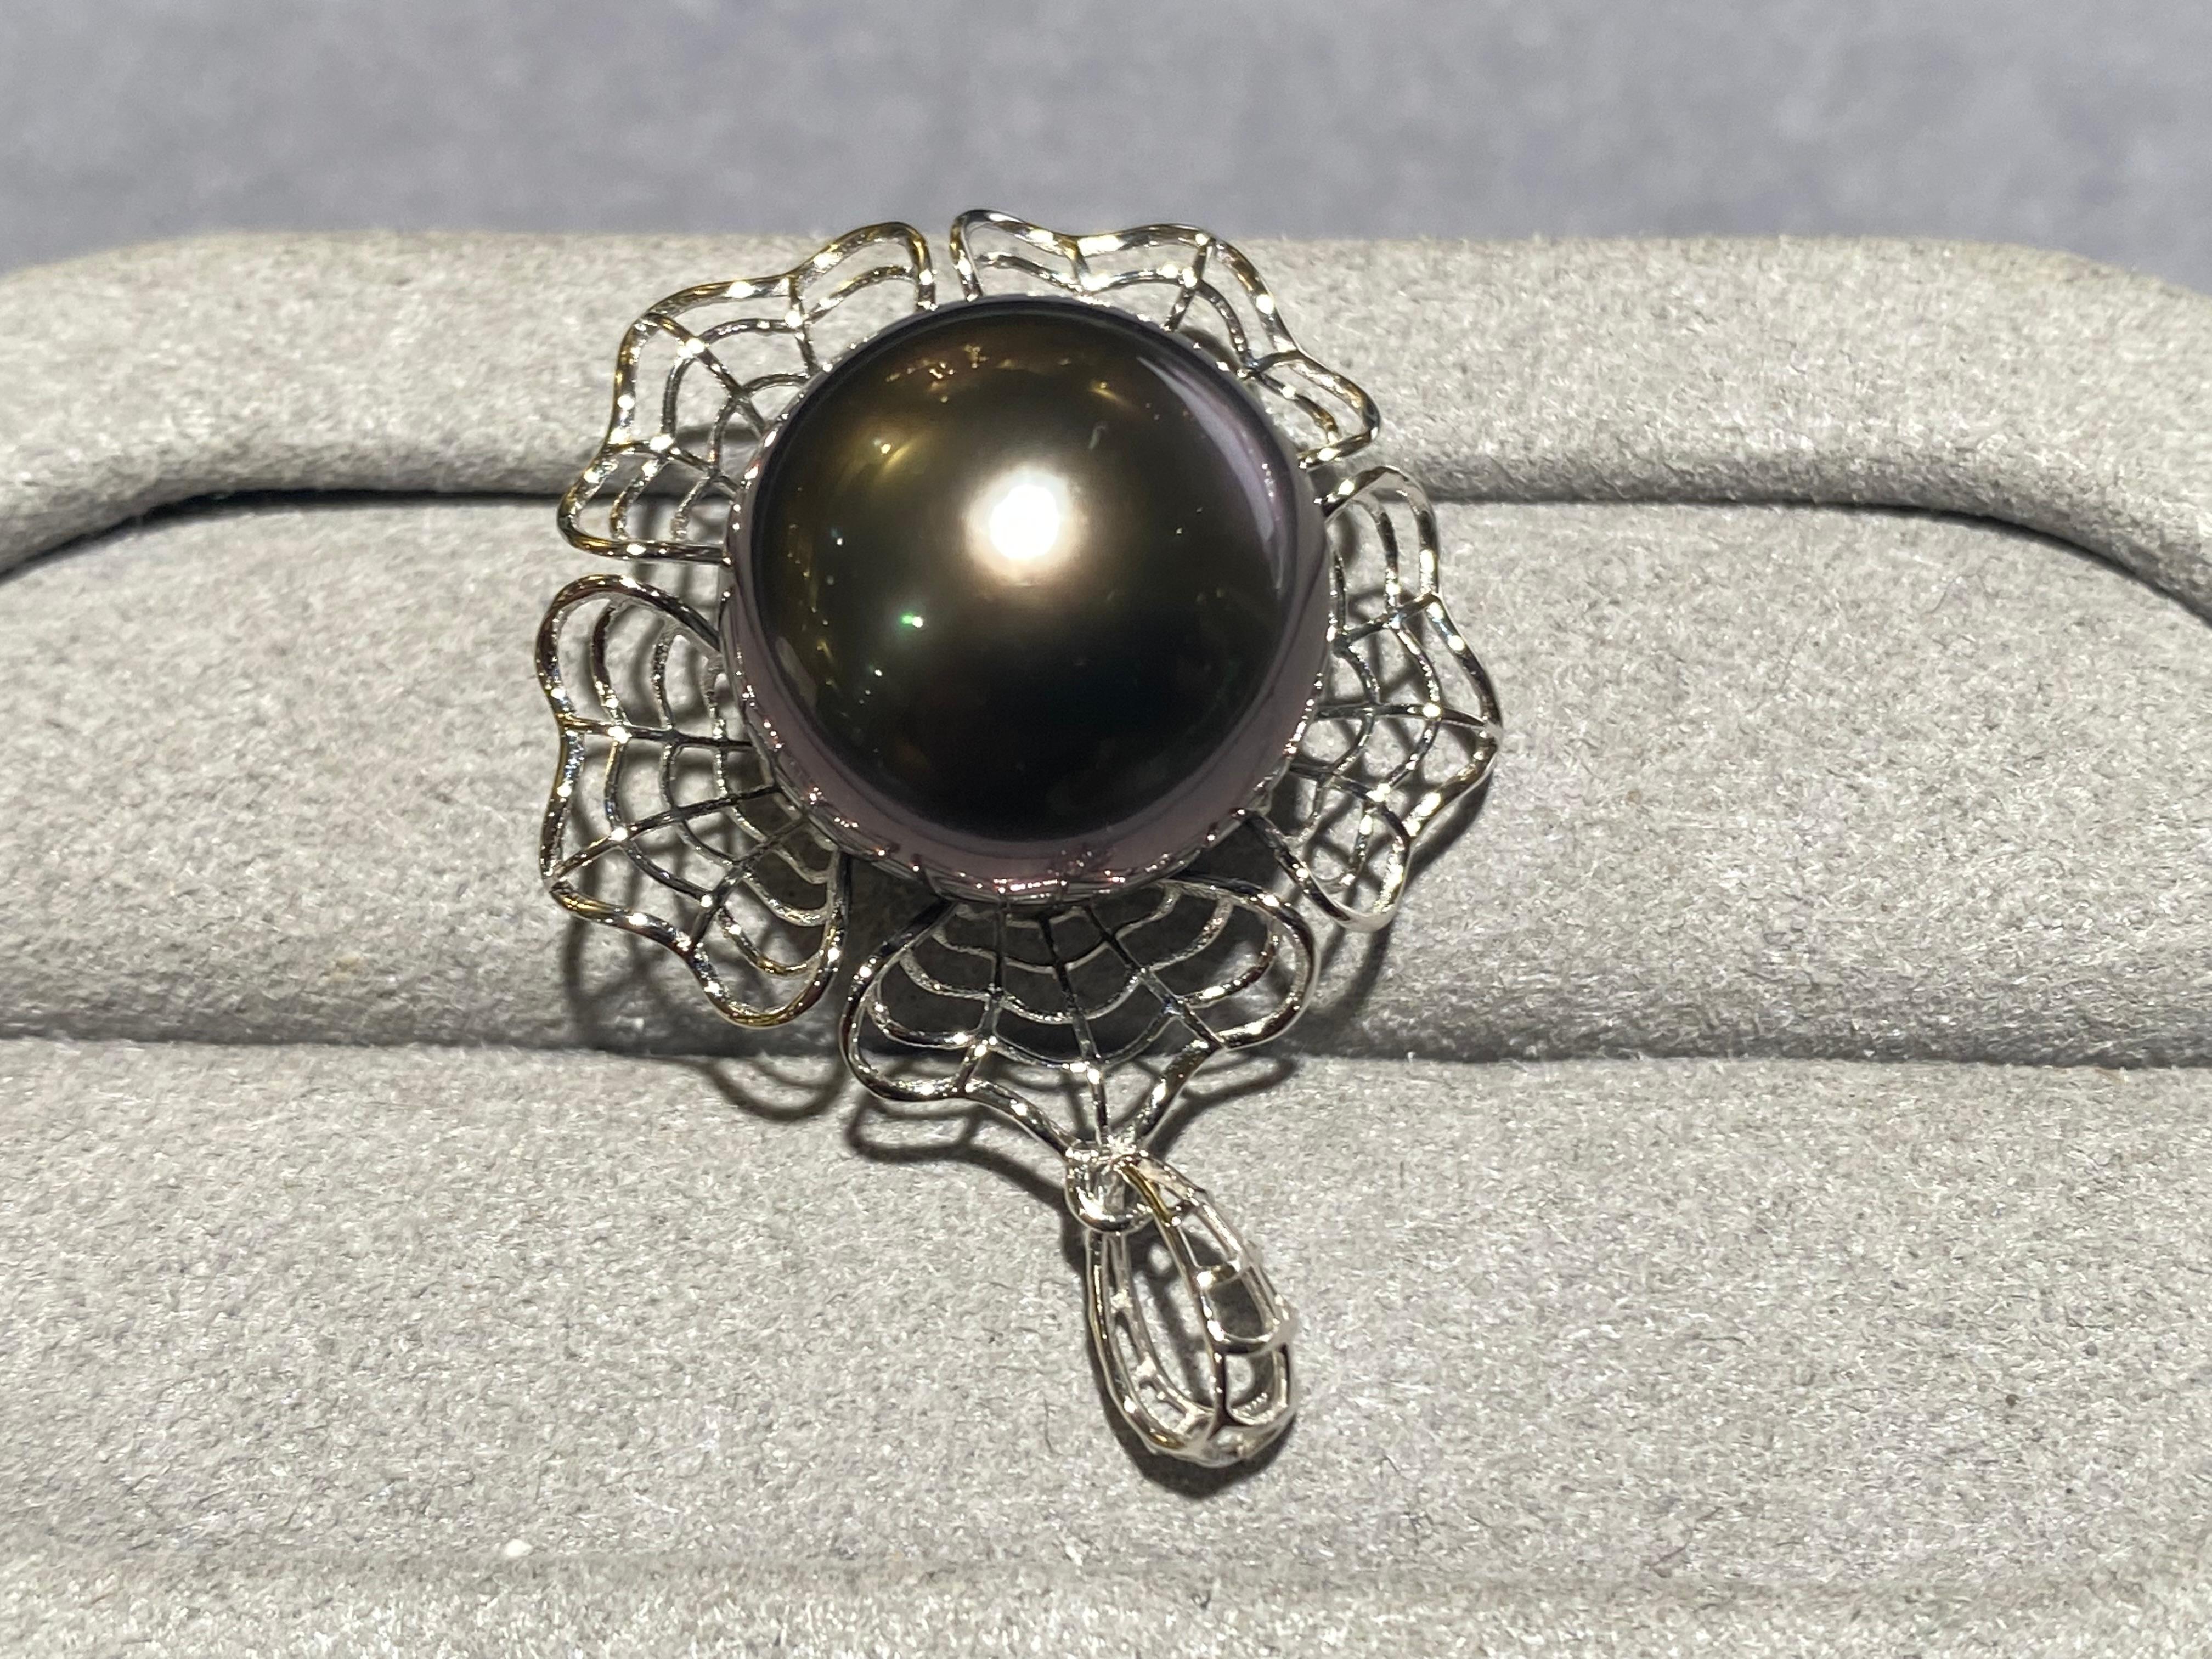 A 13.9 mm button tahitian pearl pendant in 18k white gold. This pendant is a flower design with the pearl set in the middle of the pendant. The pendant is in a mesh form and the bale matches this form as well. It is a very simple and fun design and